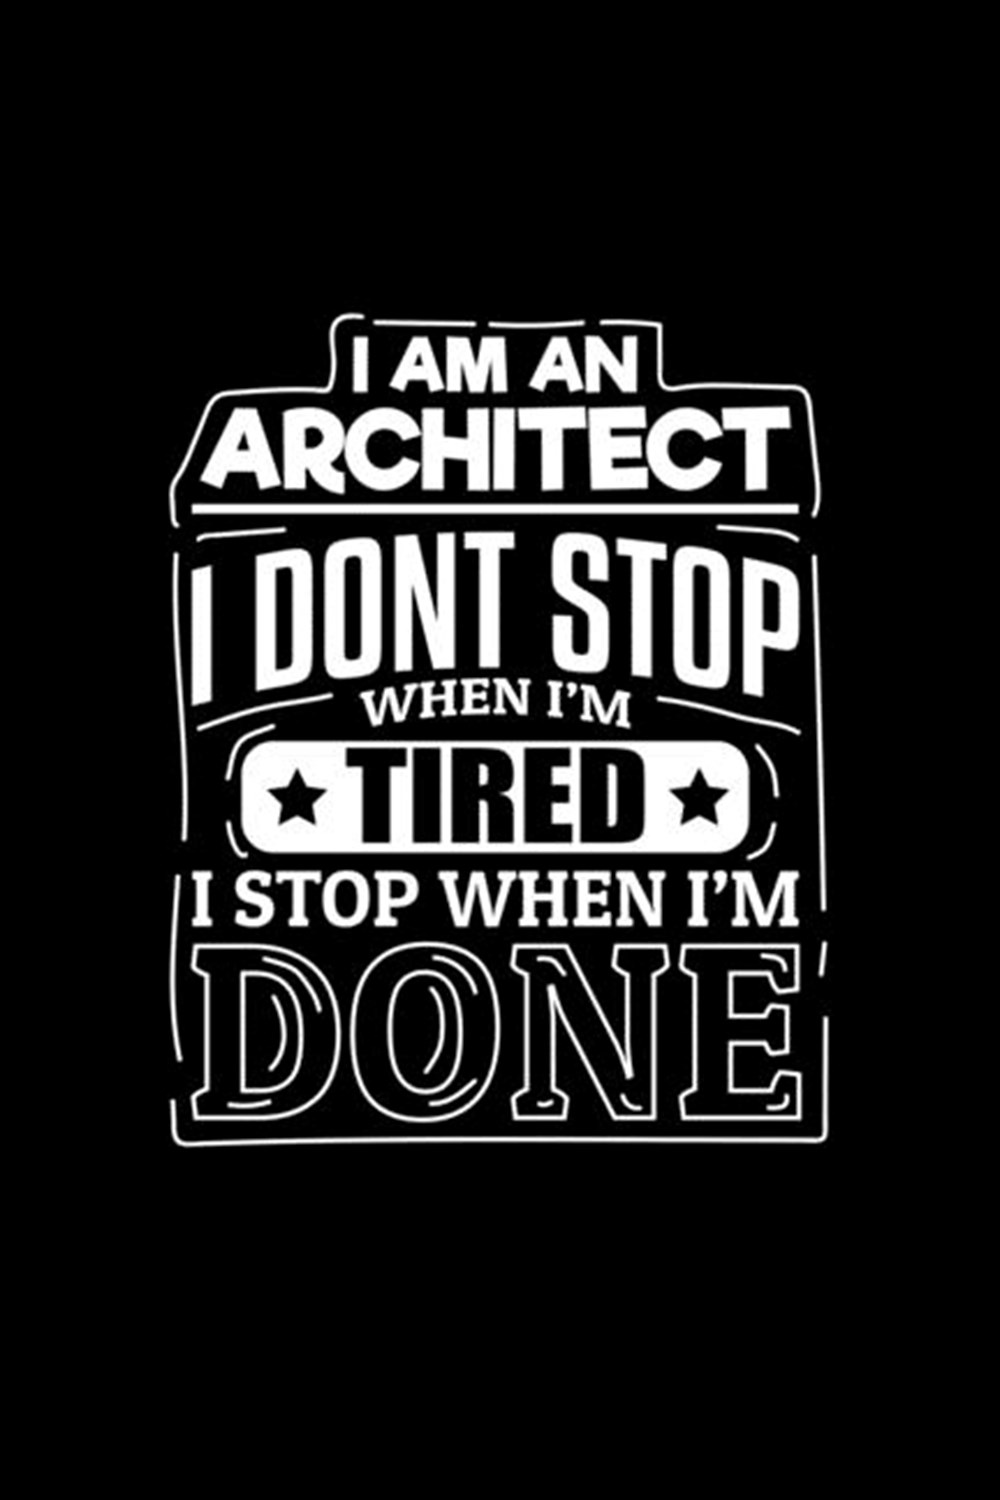 I Am An Architect I Dont Stop When I'm Tired I Stop When I'm Done Blank 5x5 grid squared engineering